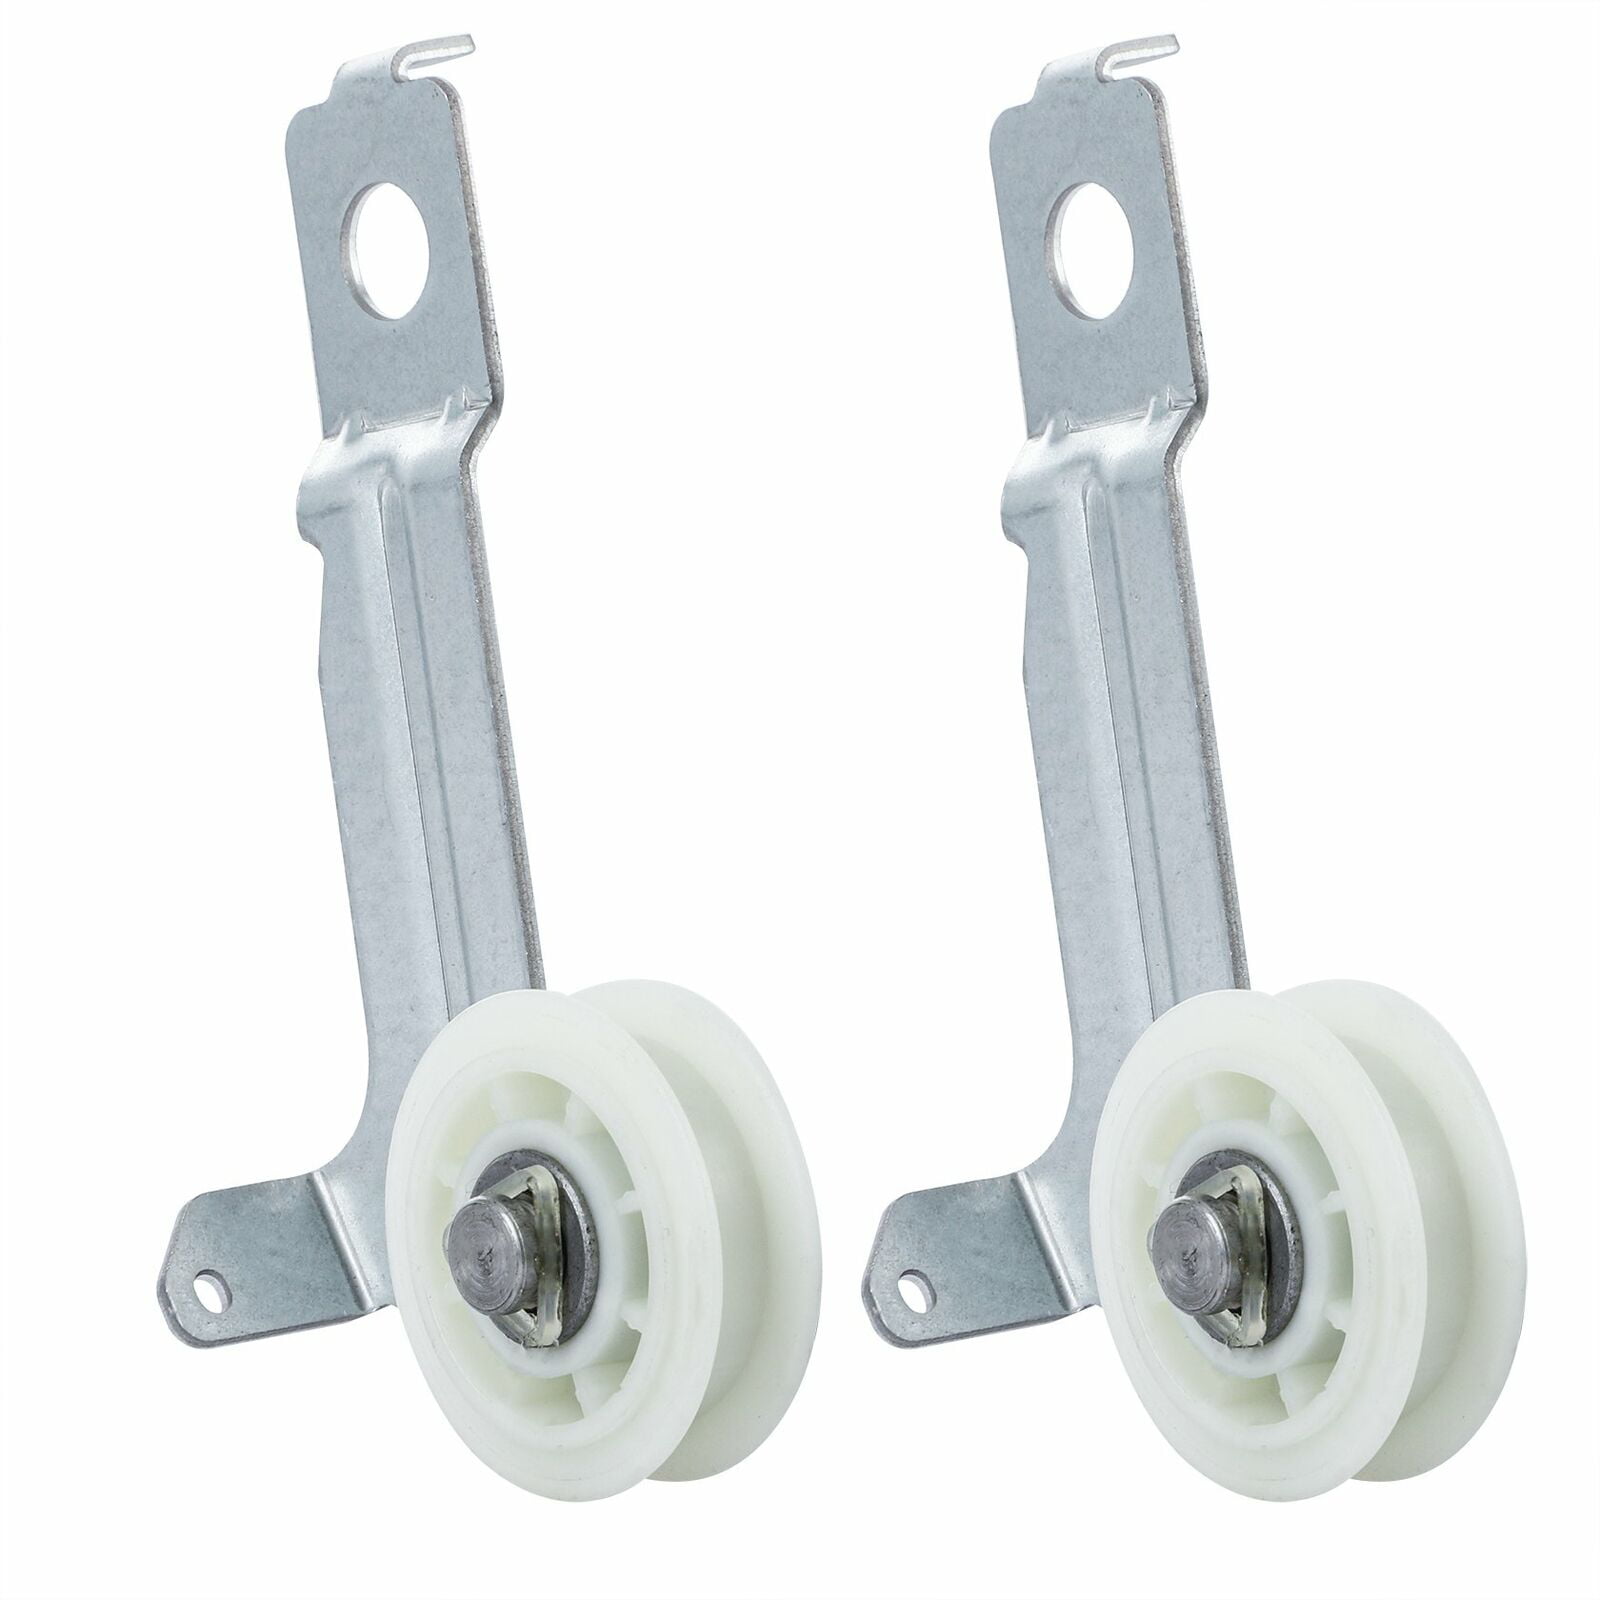 2 PACK NEW PART 8547160 DRYER IDLER PULLEY FITS WHIRLPOOL MAYTAG KENMORE SEARS 